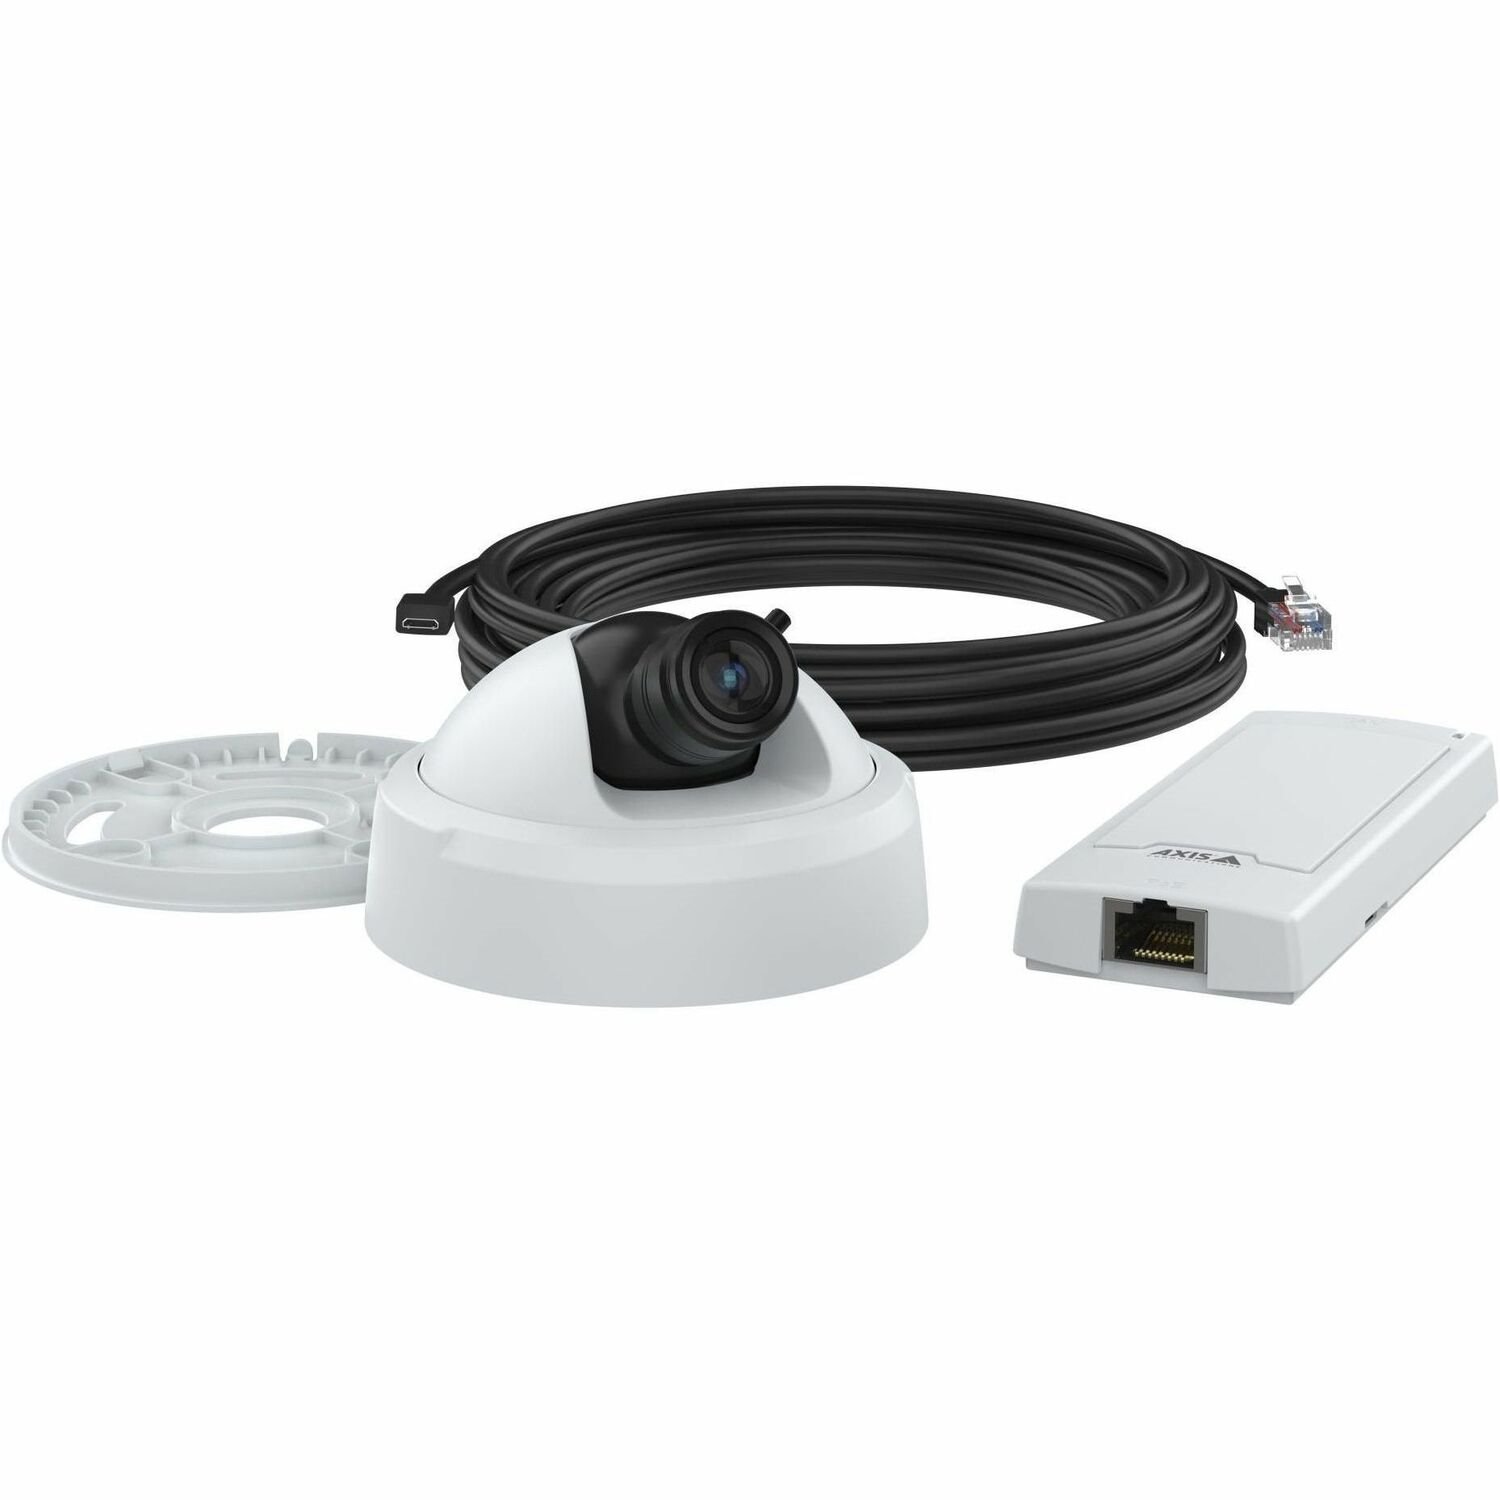 AXIS P1275 Mk II Indoor Full HD Network Camera - Colour - Dome - White - TAA Compliant